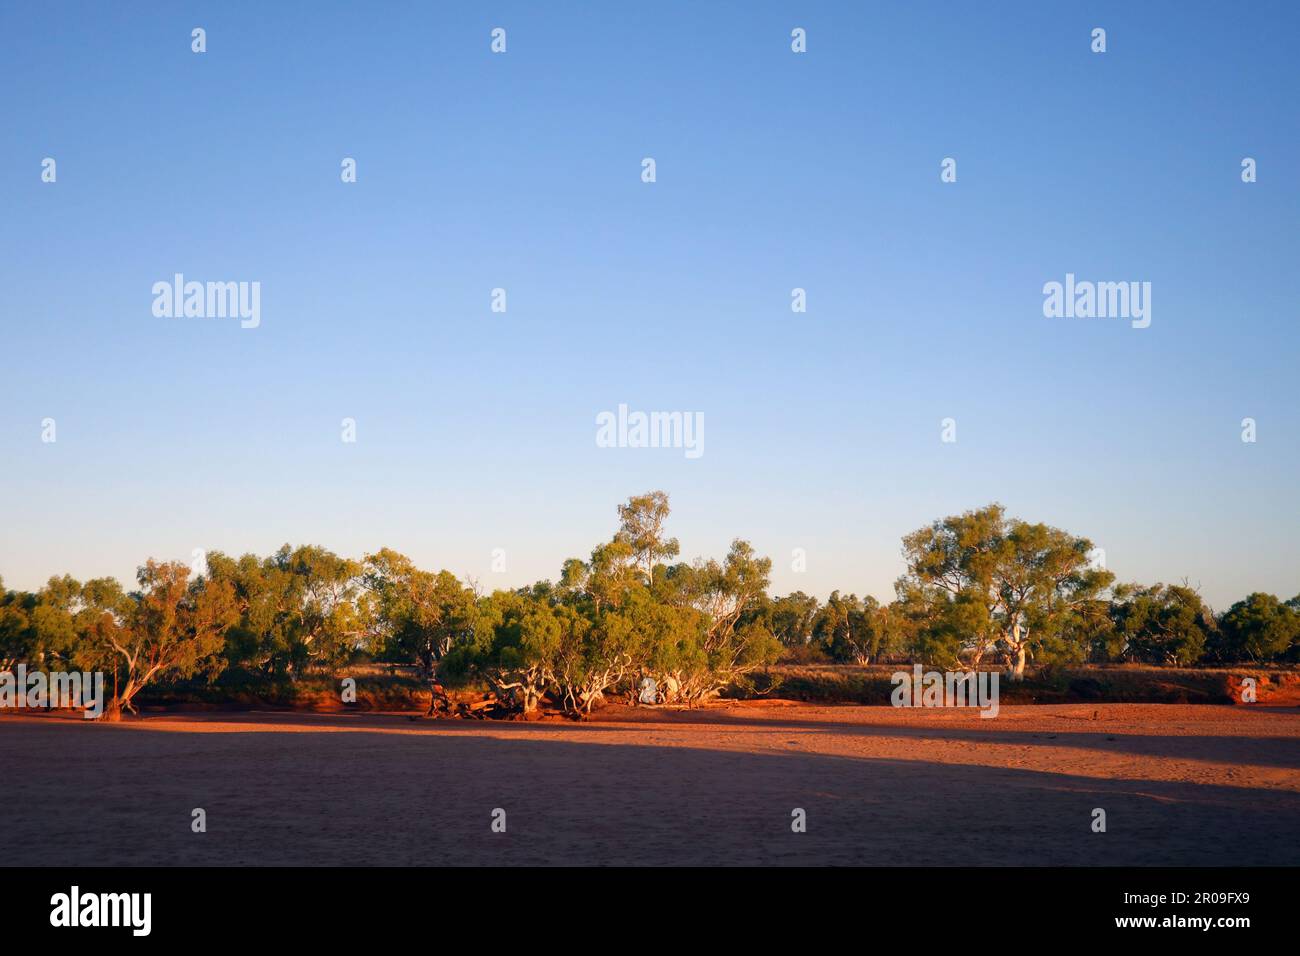 Gumtrees line the bank of the dry Wooramel River, Wooramel River Station, Western Australia Stock Photo